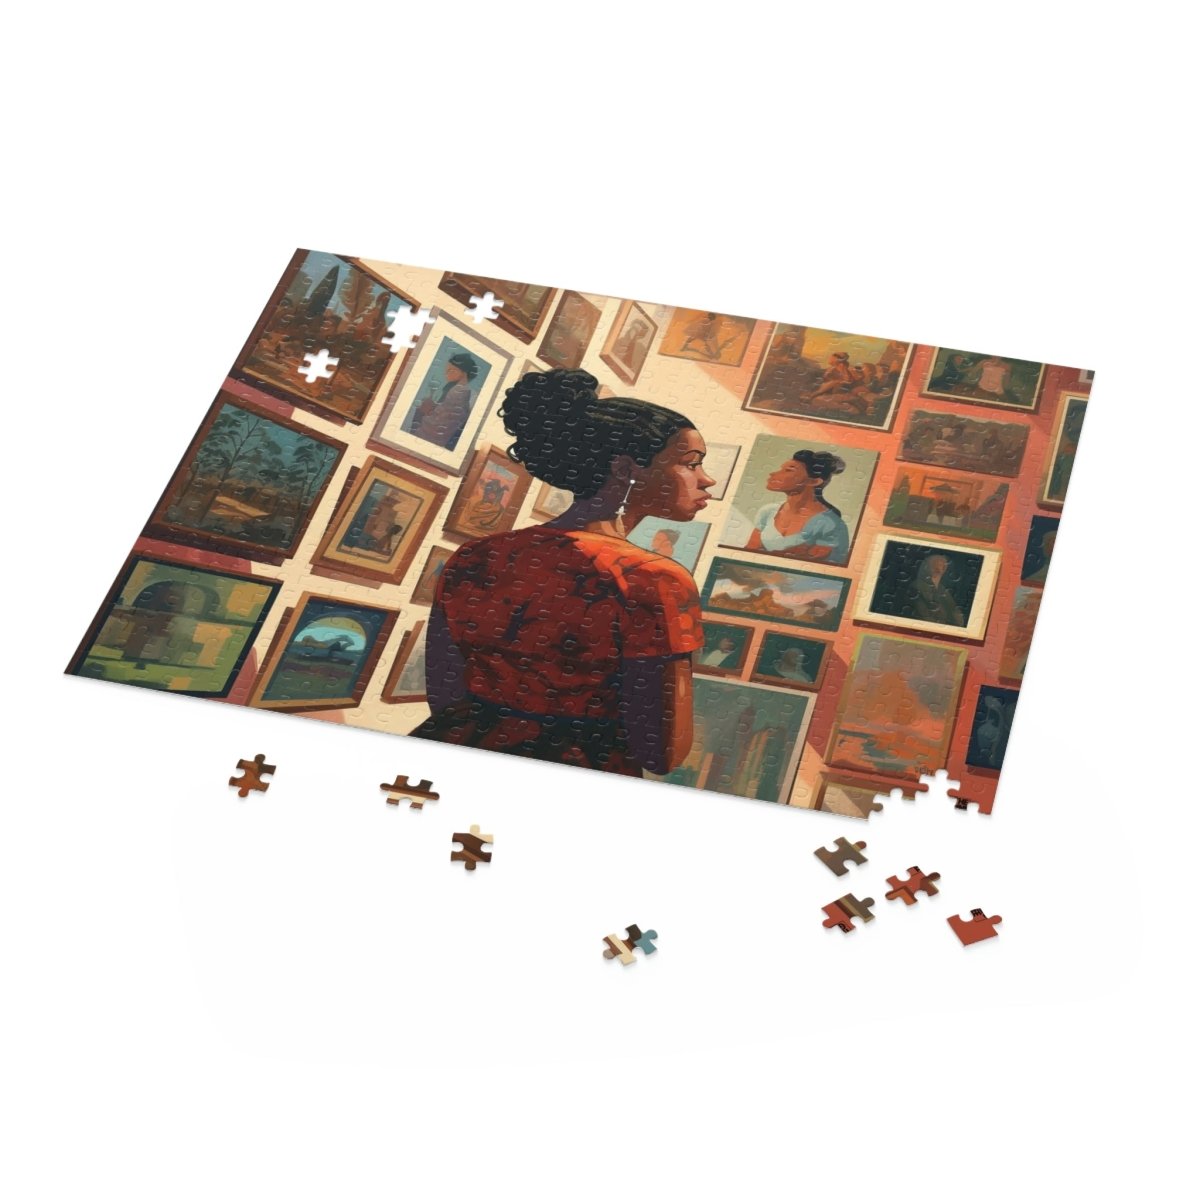 Art Gallery Walk Puzzle - The Trini Gee